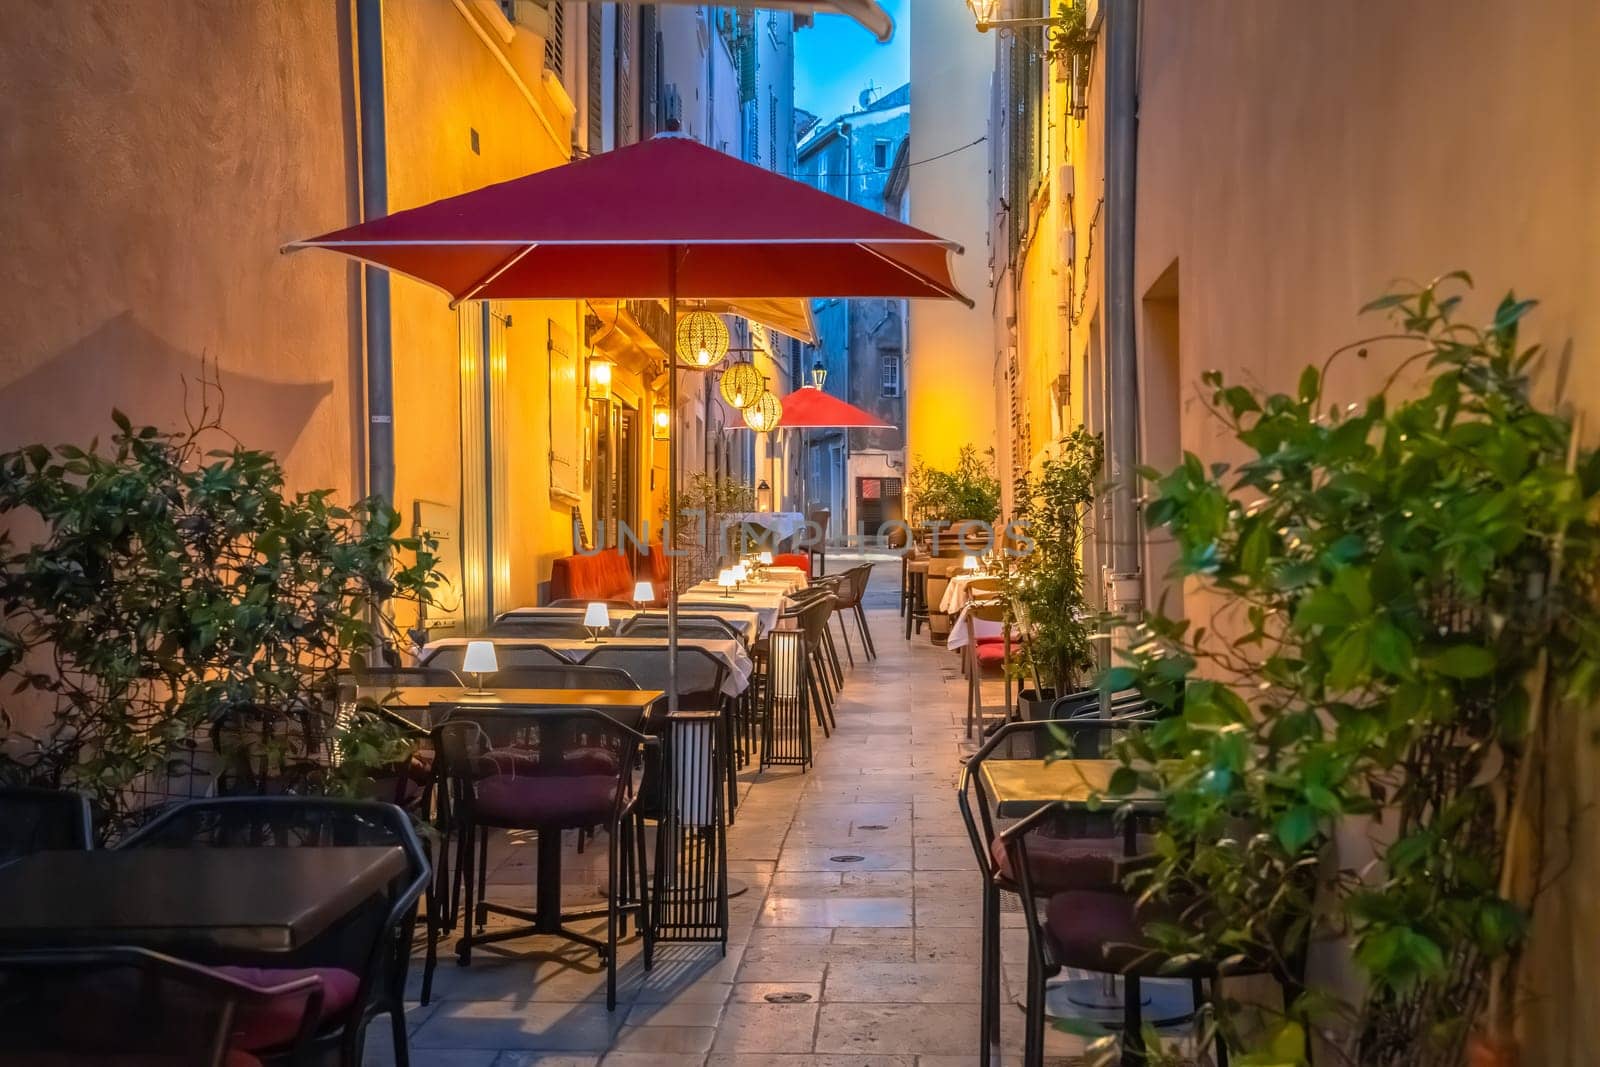 Saint Tropez stone alley with restaurants evening view, luxuty travel destination in southern France